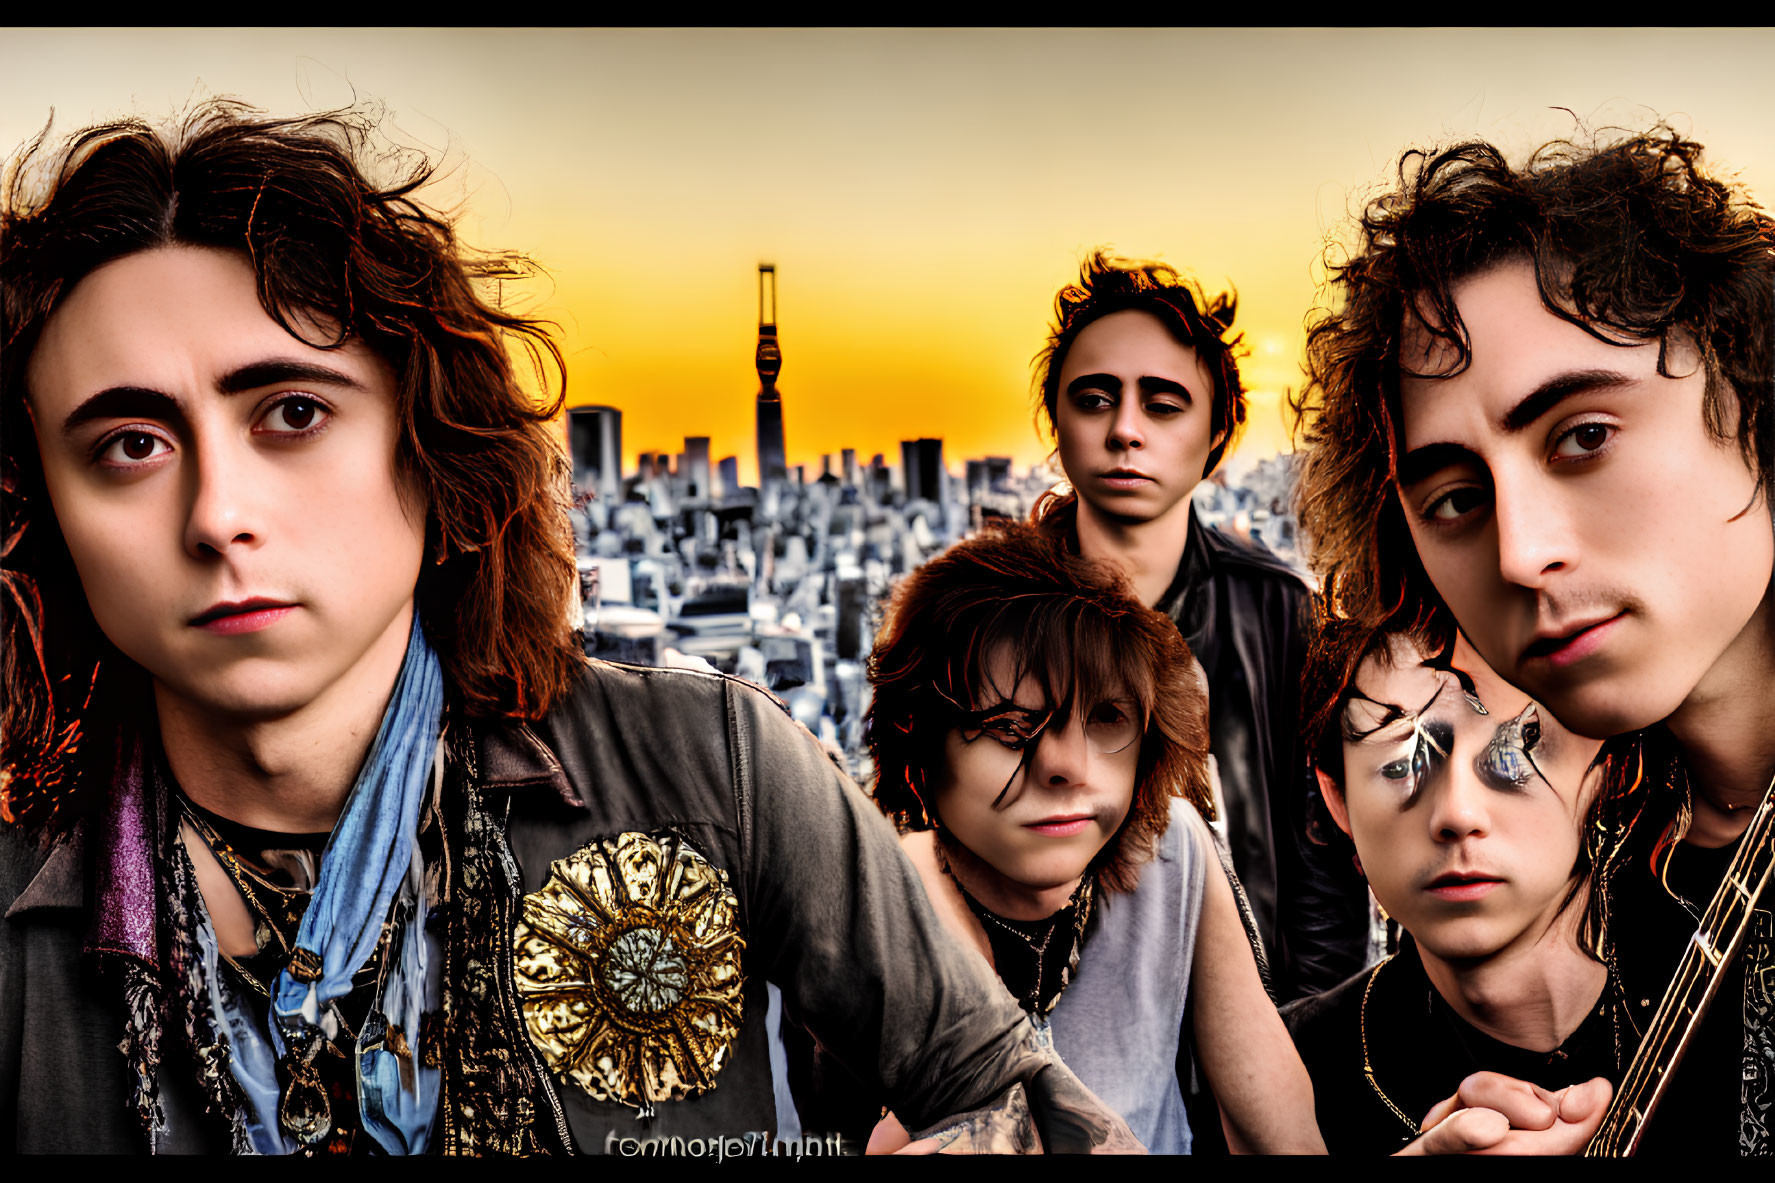 Multiple clones of a person with different expressions against urban skyline at sunset